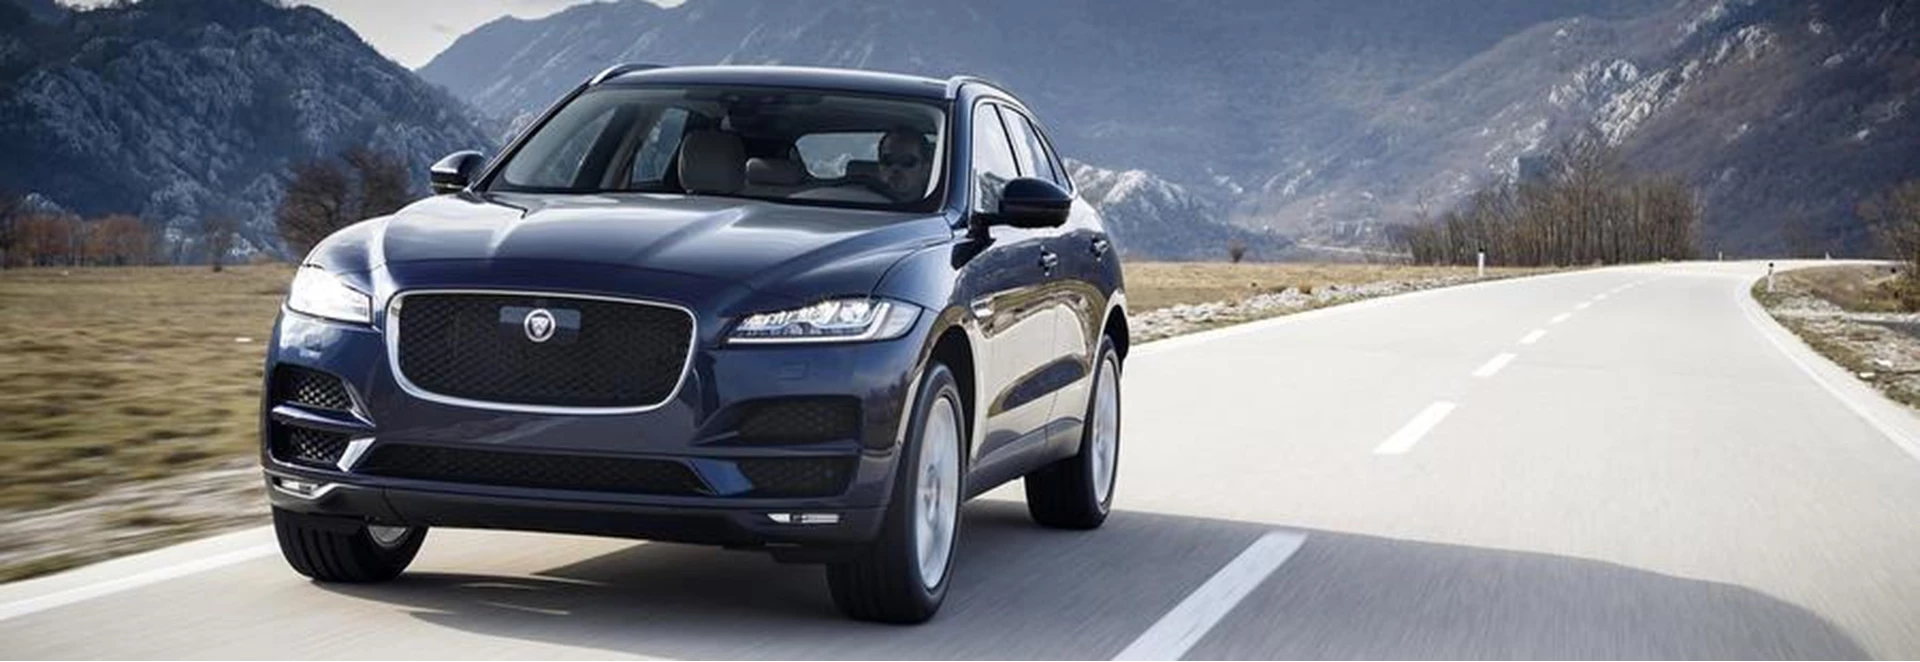 Jaguar improves Ingenium engines for XE, XF and F-PACE